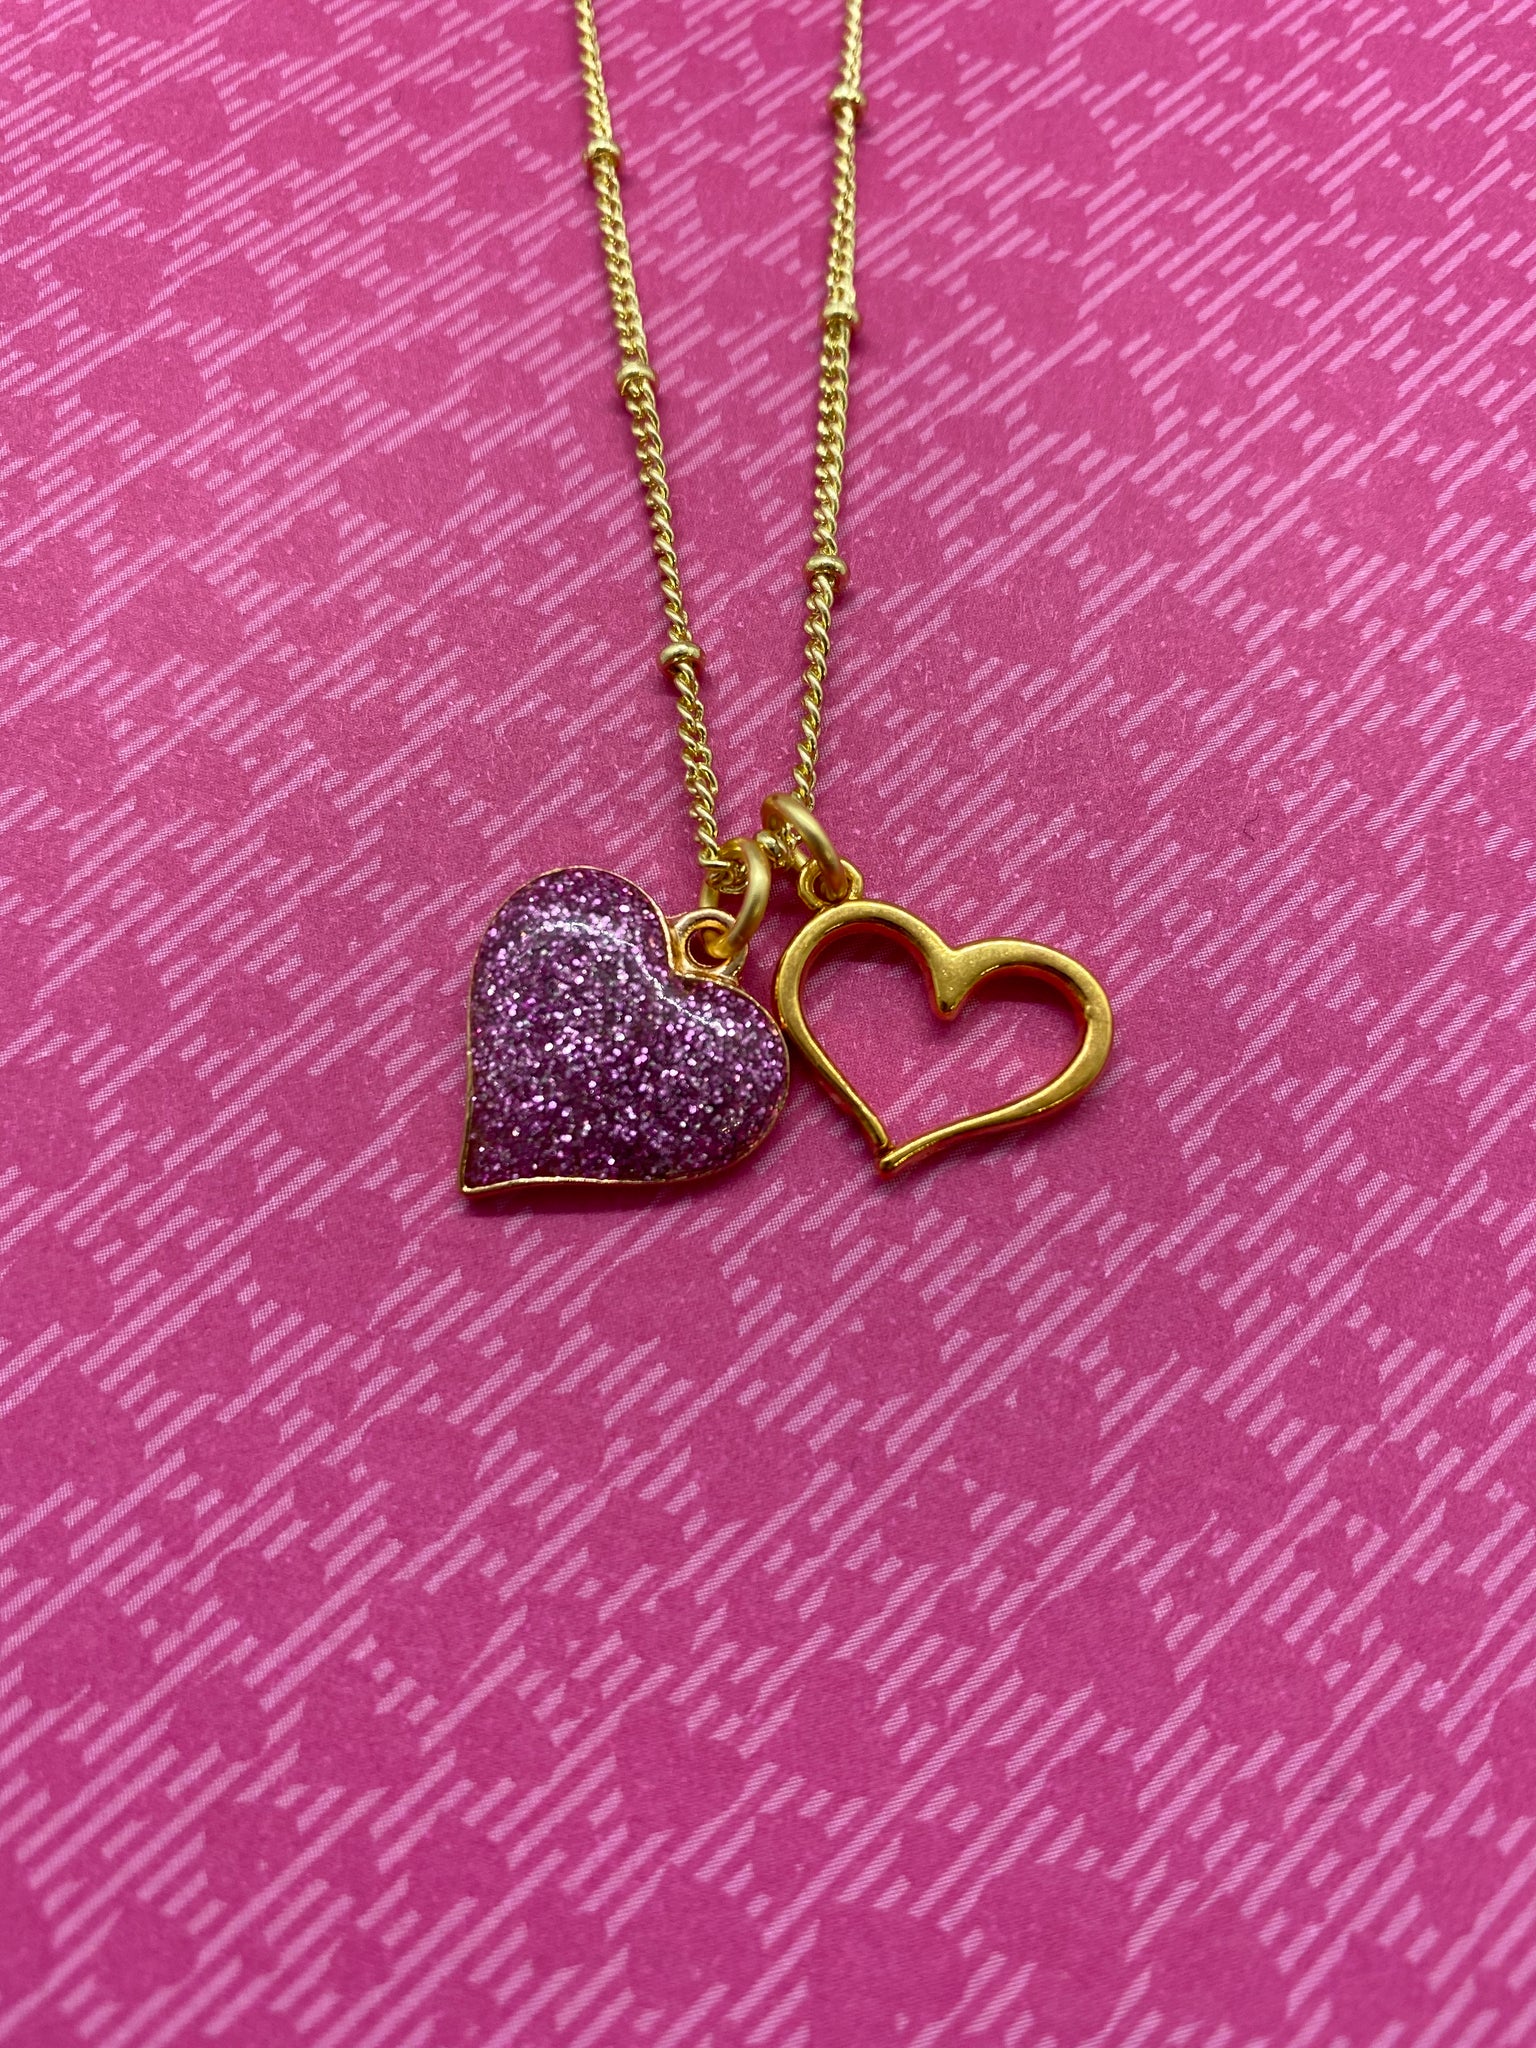 Pink Glitter Heart Necklace with Gold Heart Charm